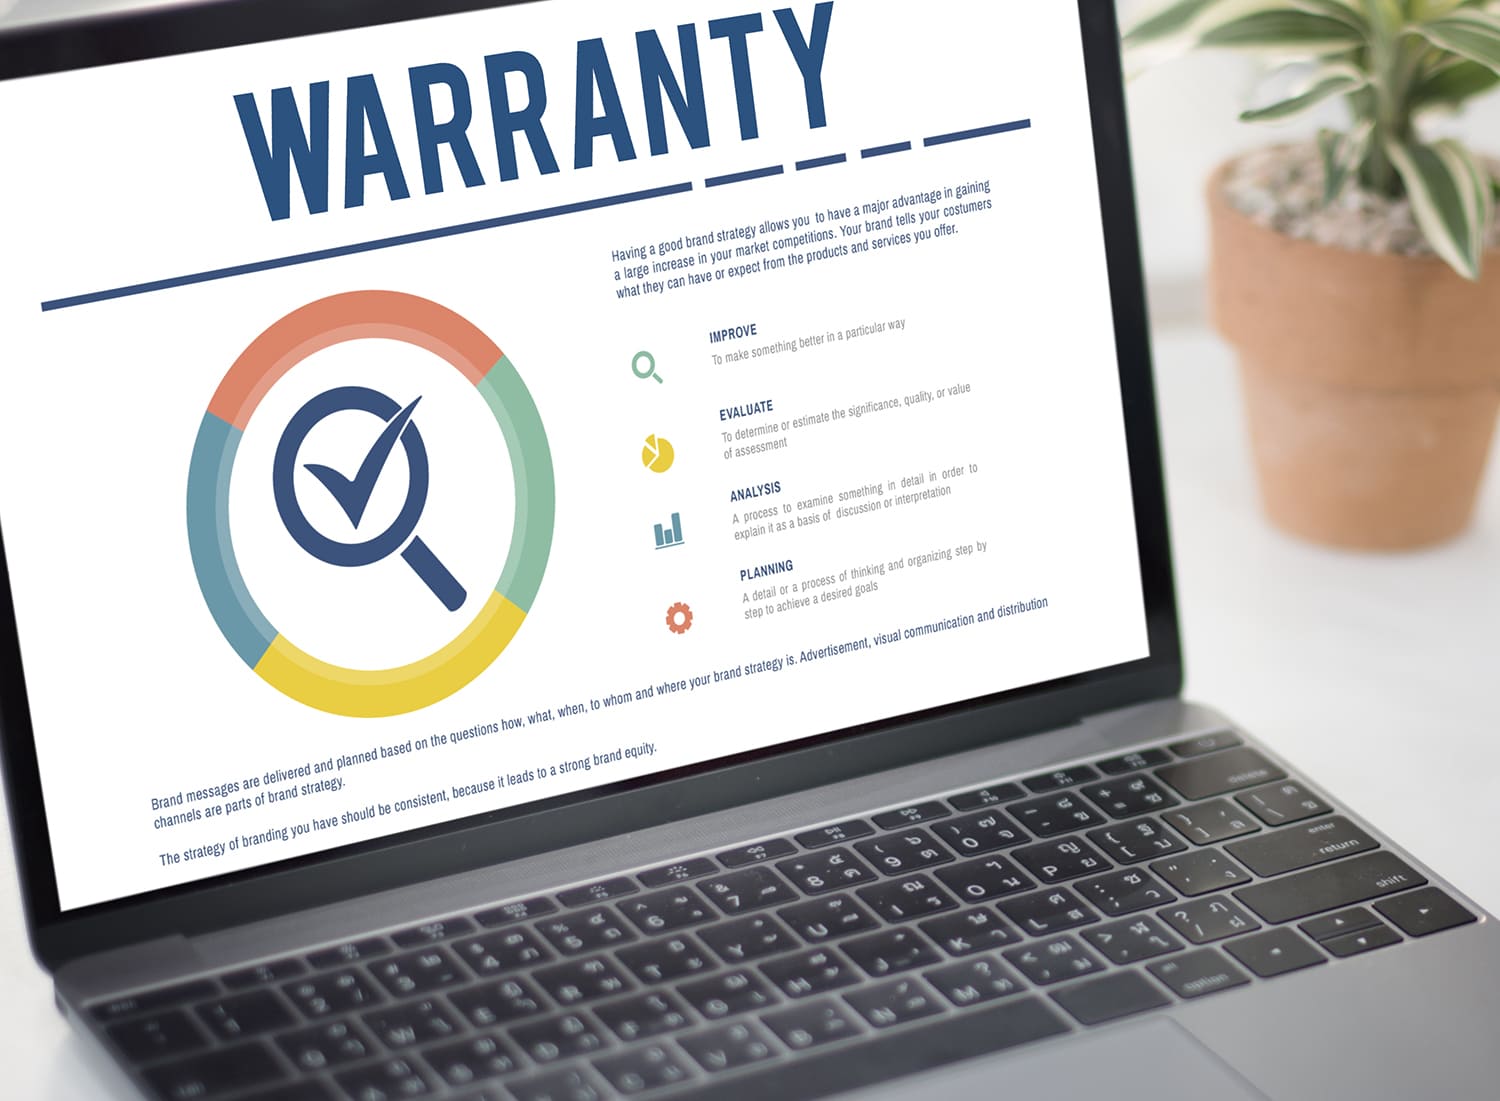 Warranty Management Services of Inspirisys Solutions Limited